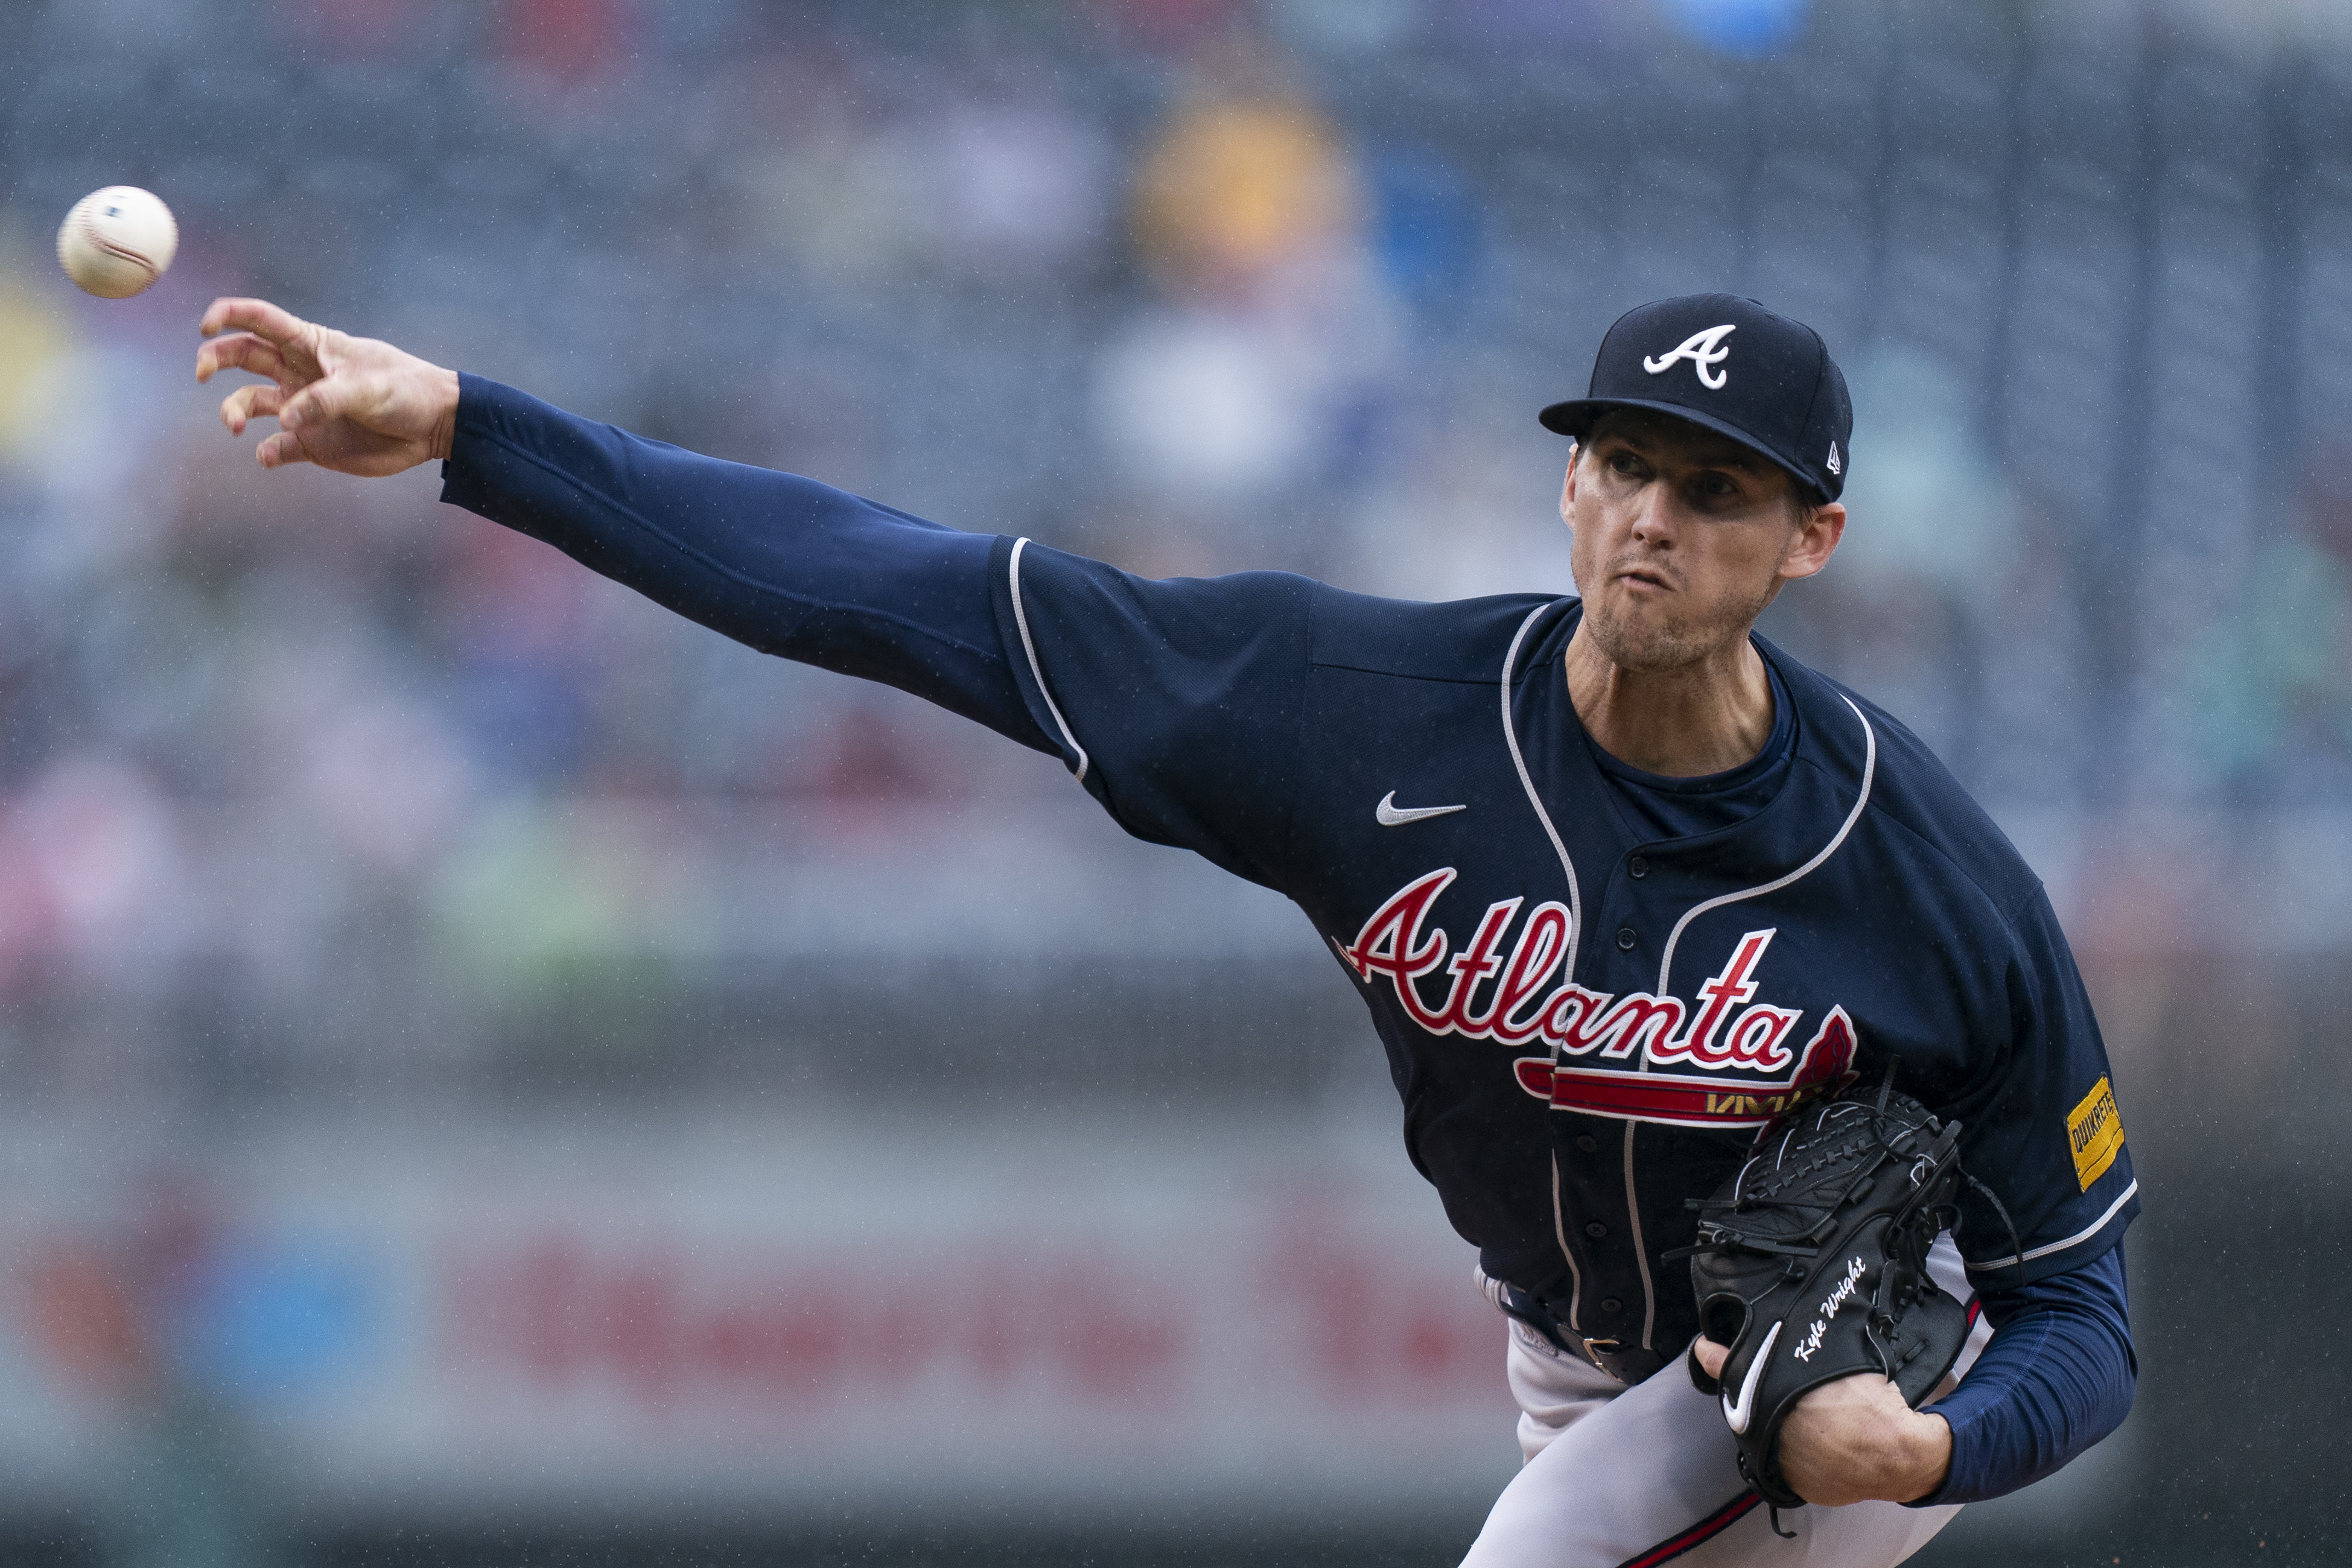 Braves are one of MLB's best teams, and Brian Snitker is their guiding force